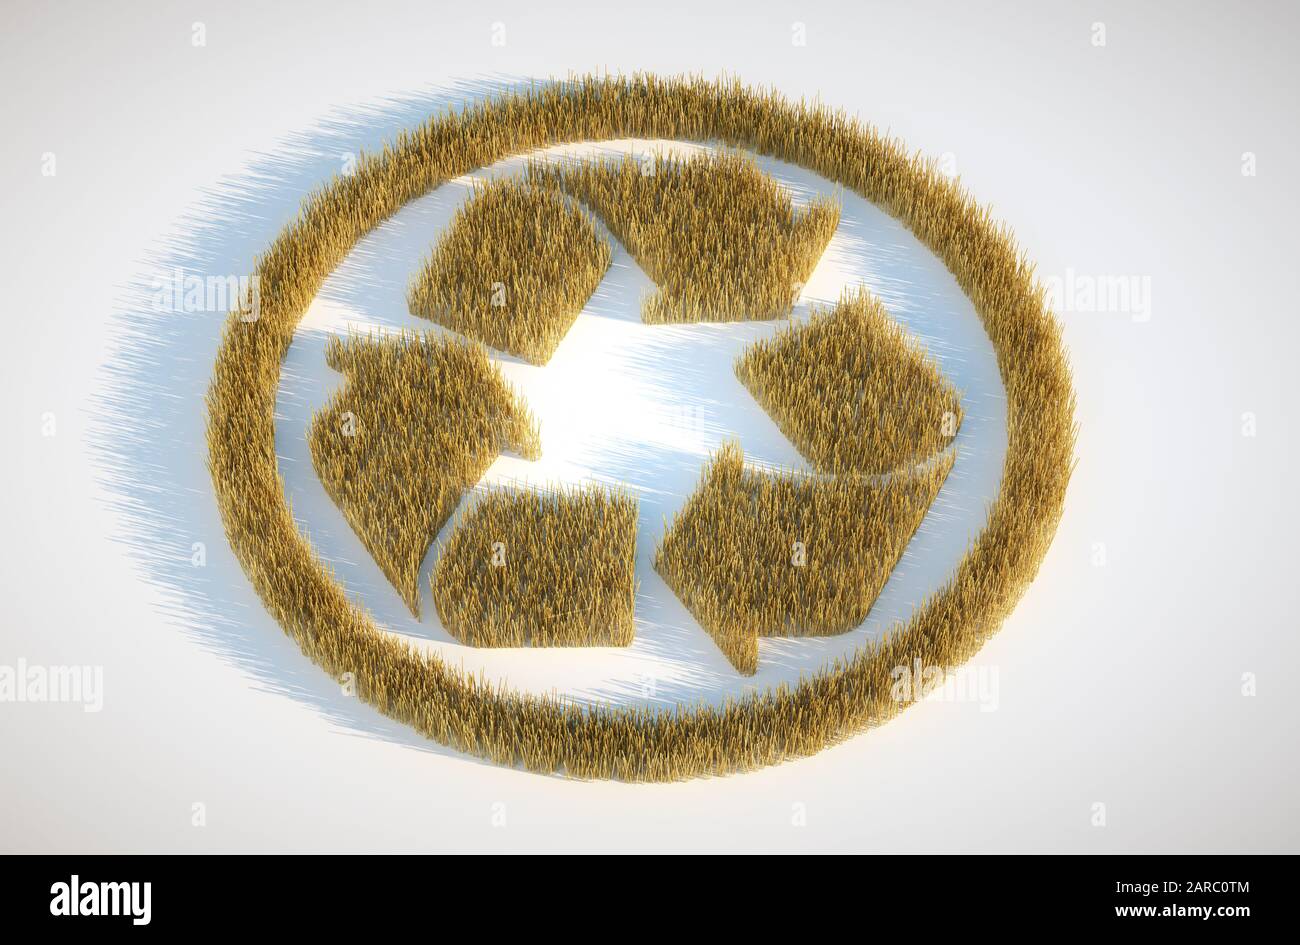 3d render image of crop circle with recyclation symbol Stock Photo